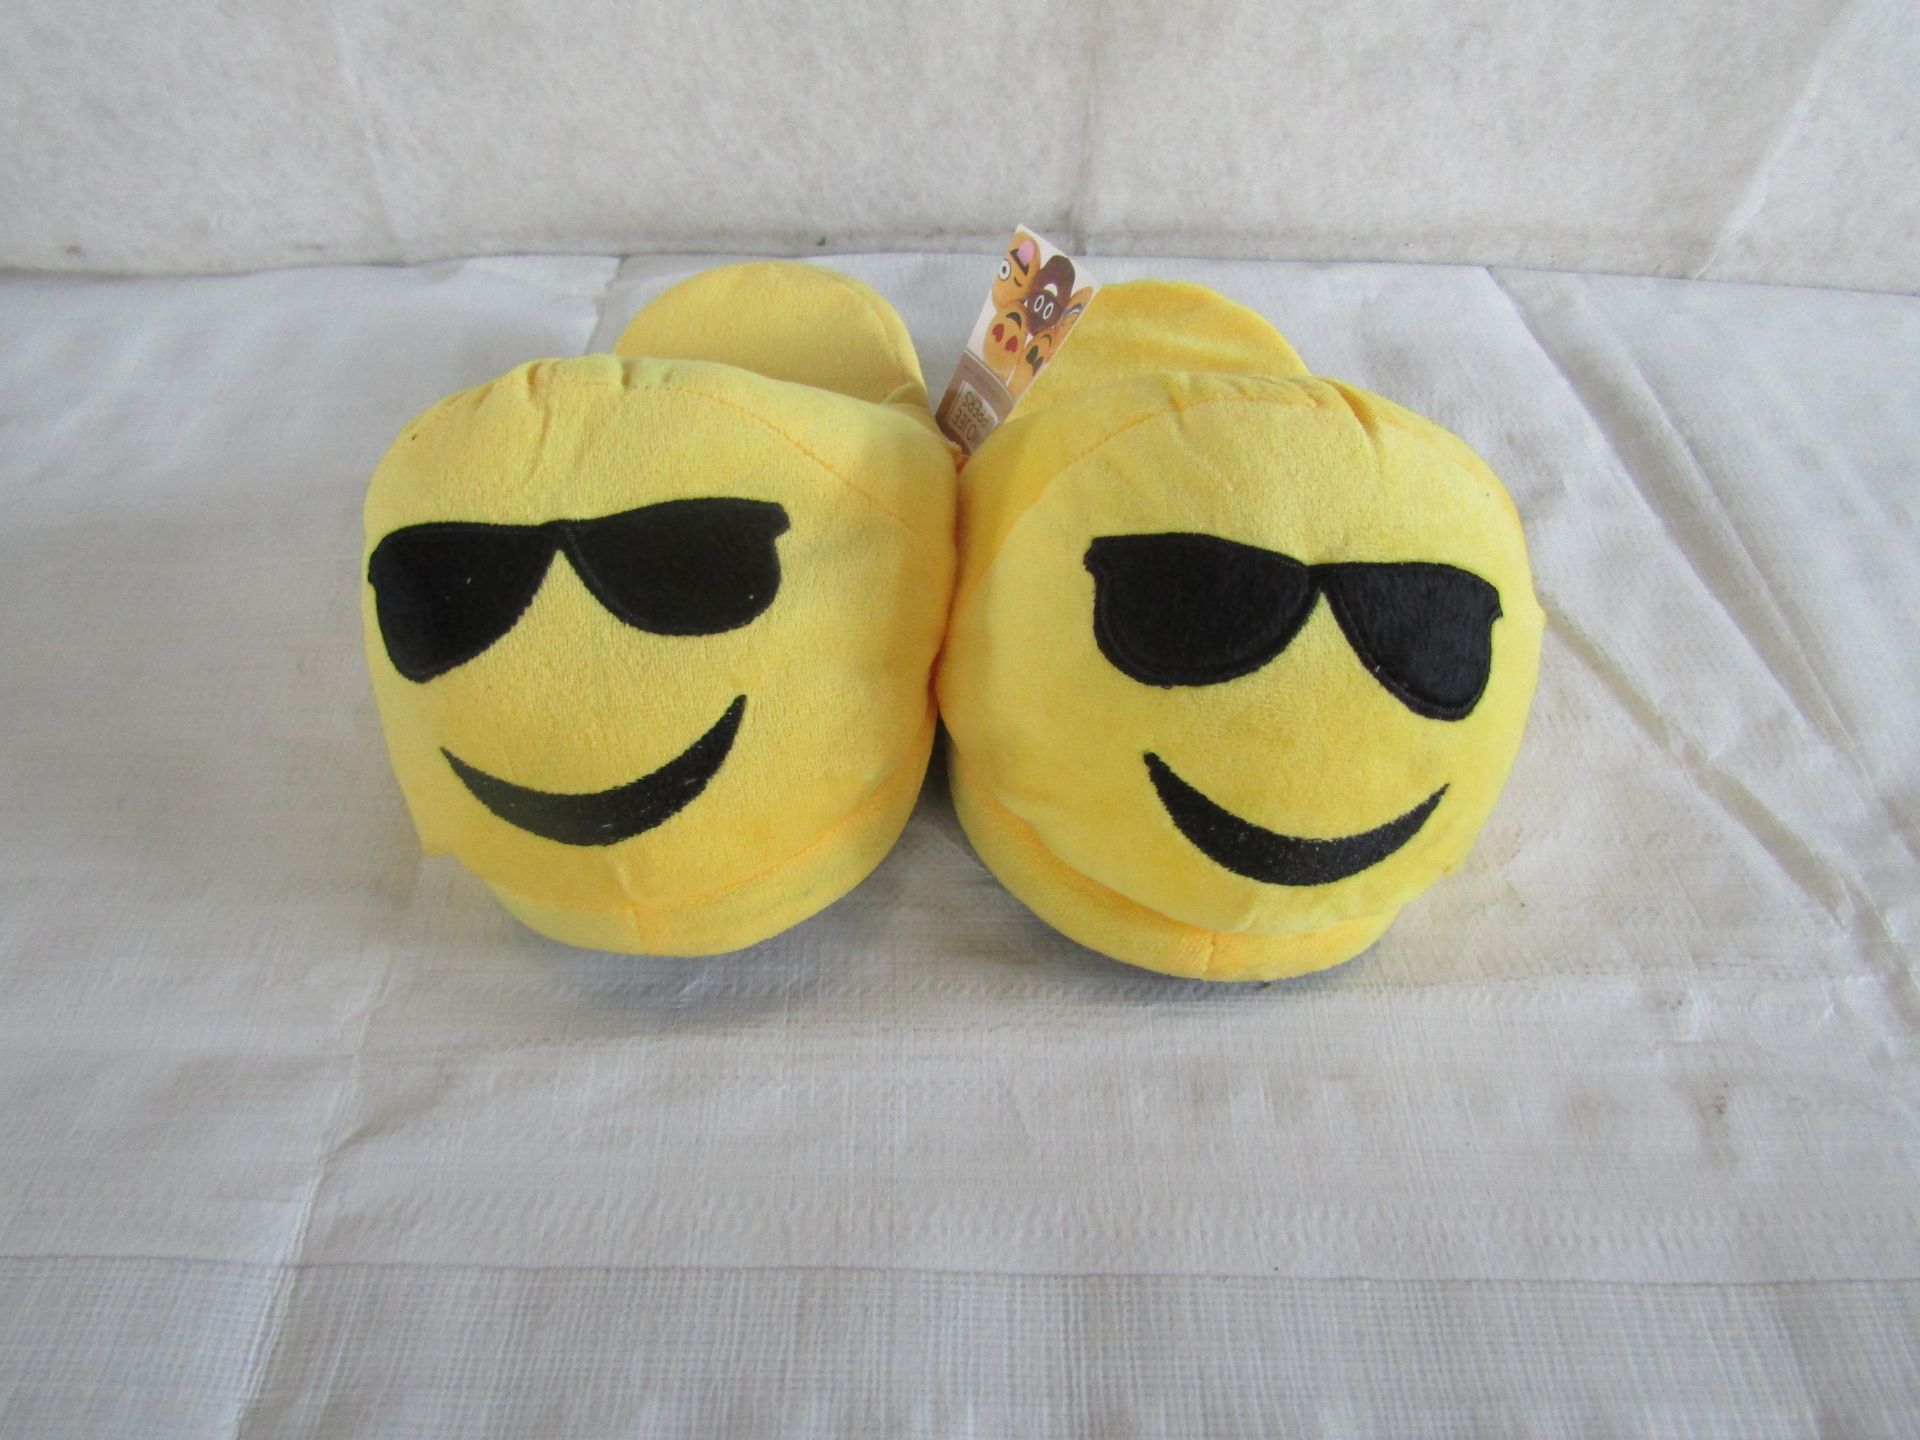 Sunglasses Emoji Slippers ( One Size Fits Most ) - Packaged.